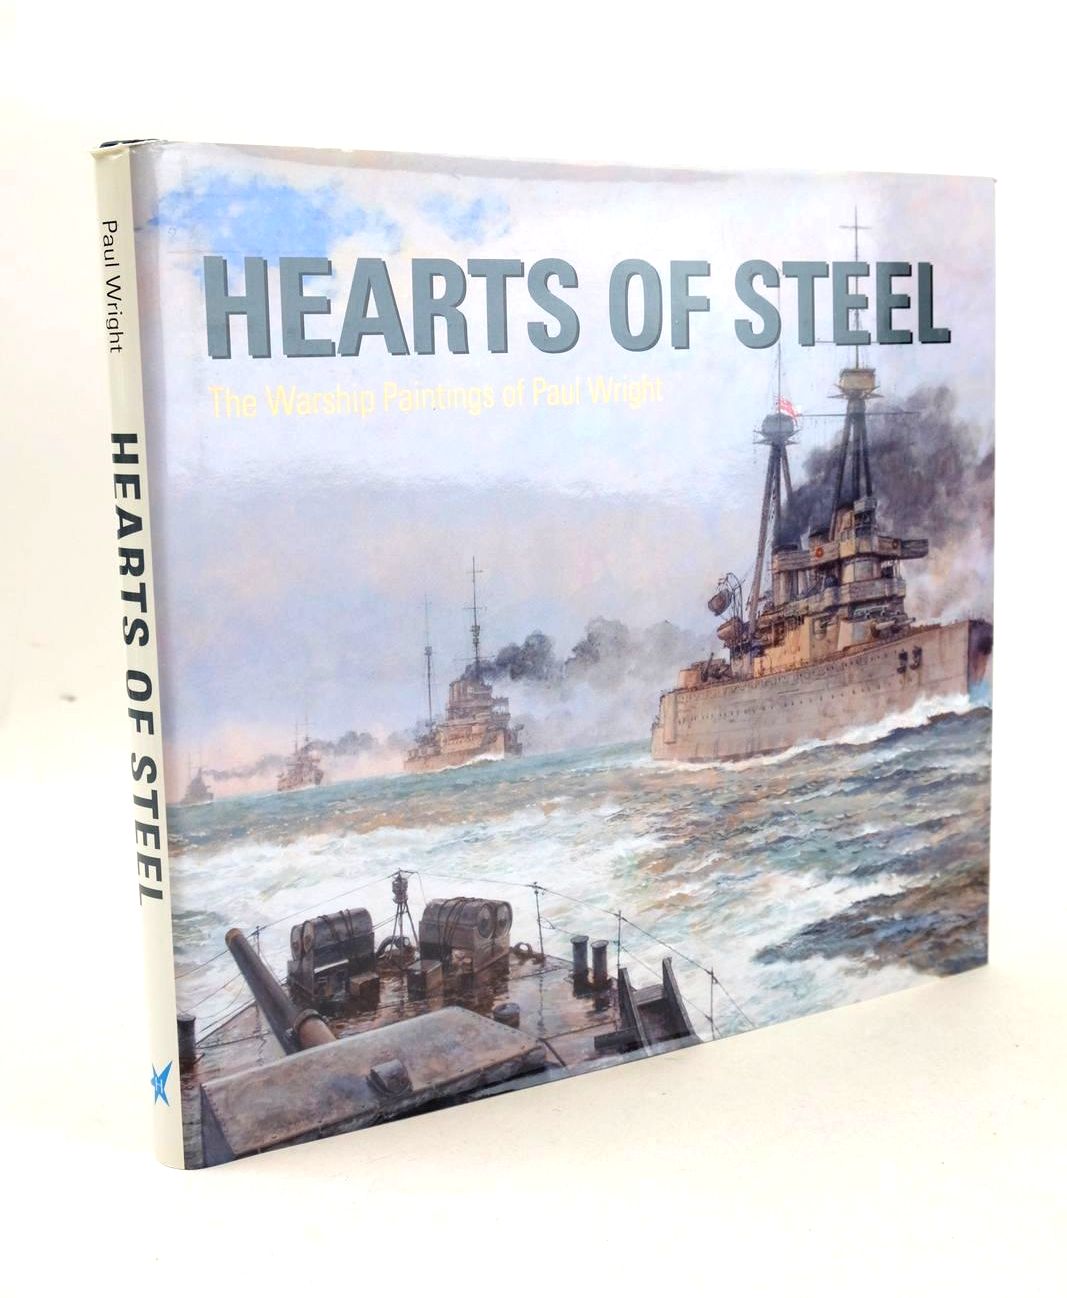 Photo of HEARTS OF STEEL written by Wright, Paul illustrated by Wright, Paul published by Halstar (STOCK CODE: 1326515)  for sale by Stella & Rose's Books